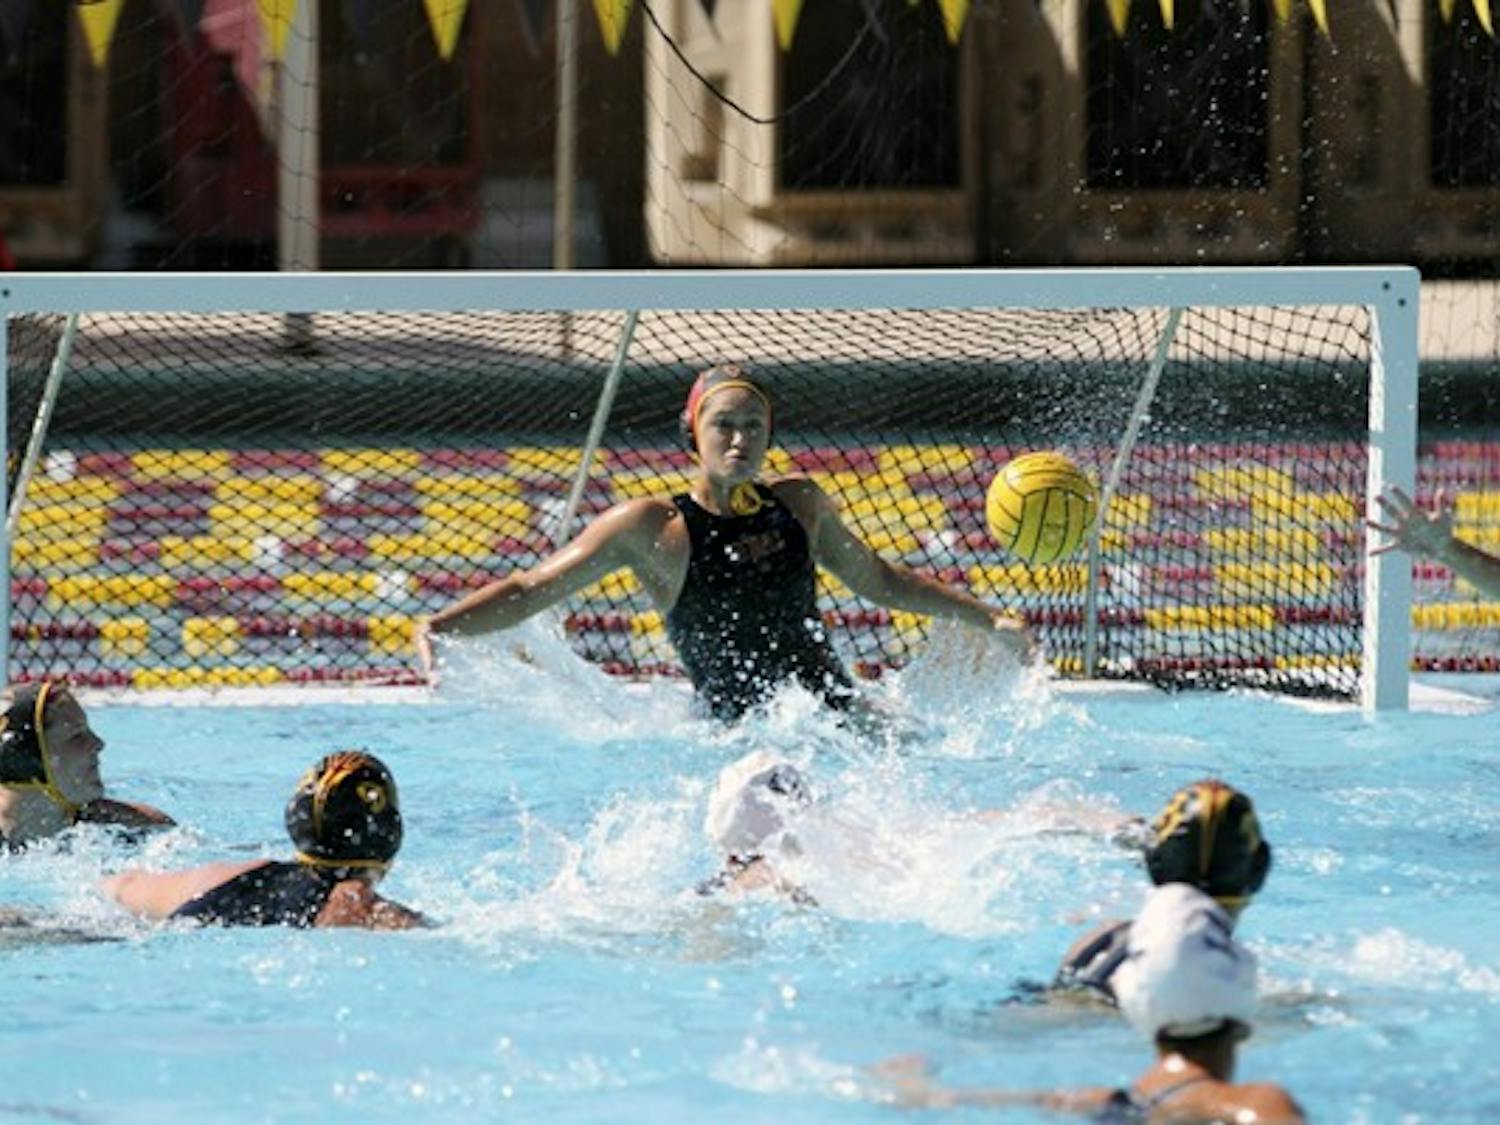 Ianeta Hutchinson makes a save in a game against San Diego State on March 3. Hutchinson and the Sun Devils are anticipating tough games against Stanford and San Jose State this weekend. (Photo by Sam Rosenbaum)